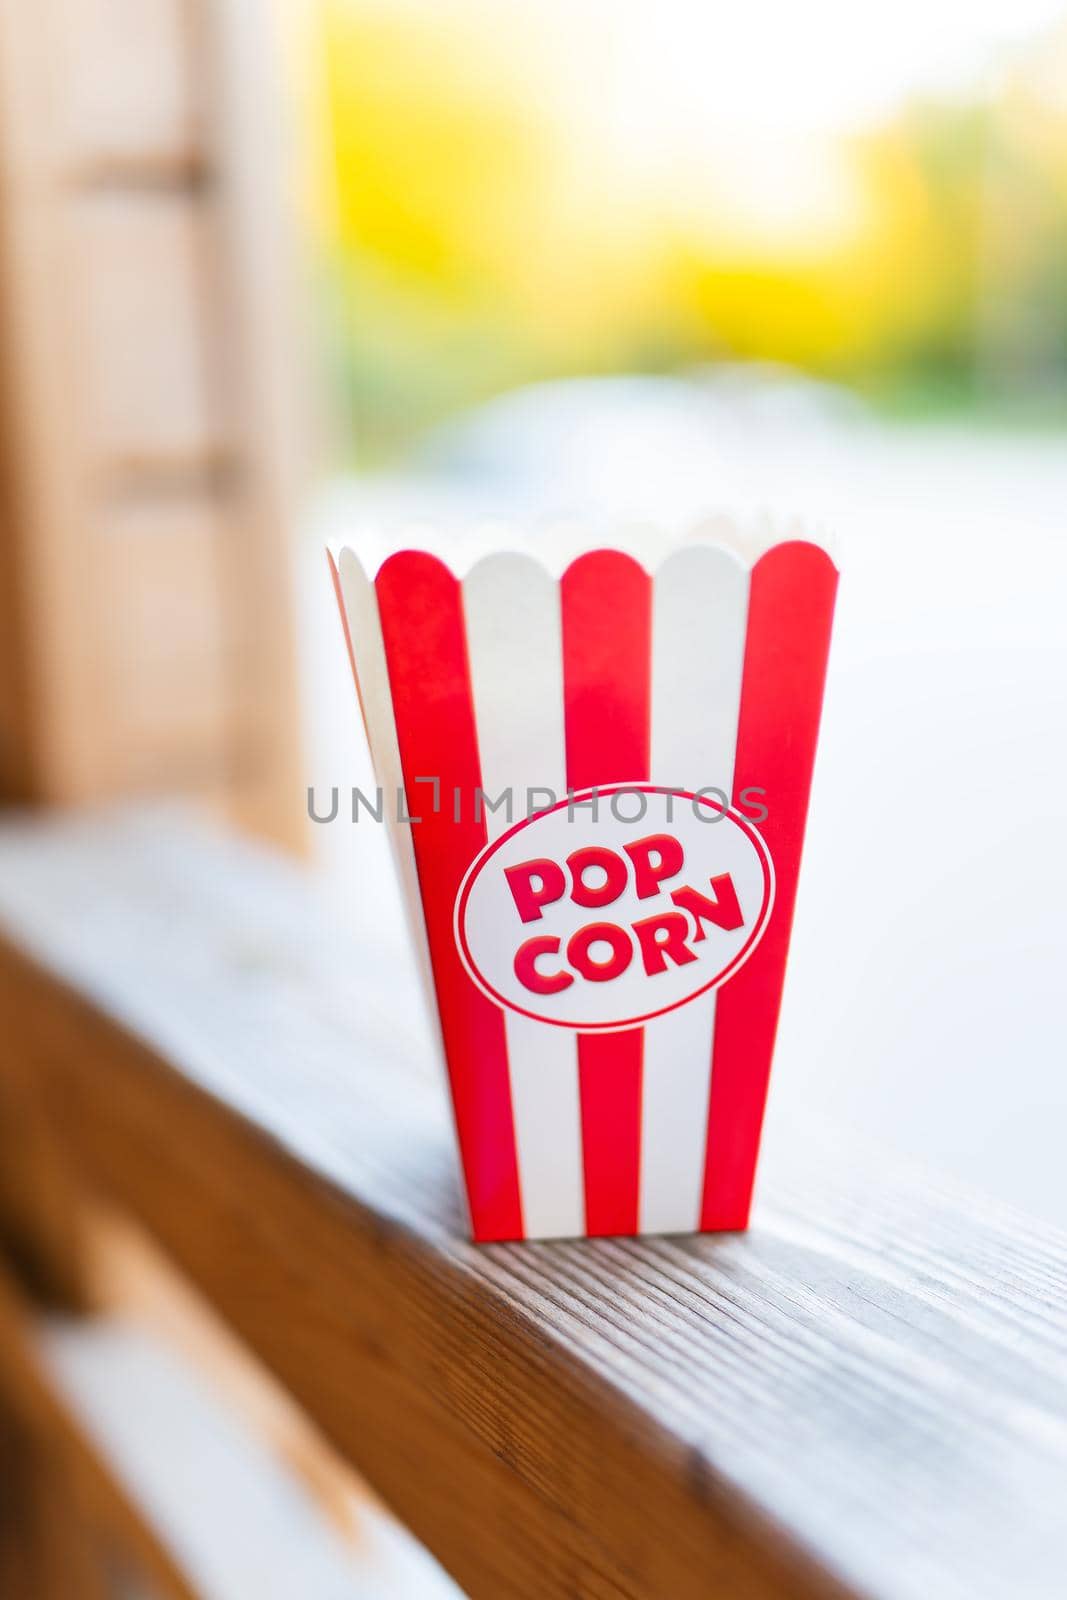 Classic red striped outdoor popcorn box. Going to the cinema